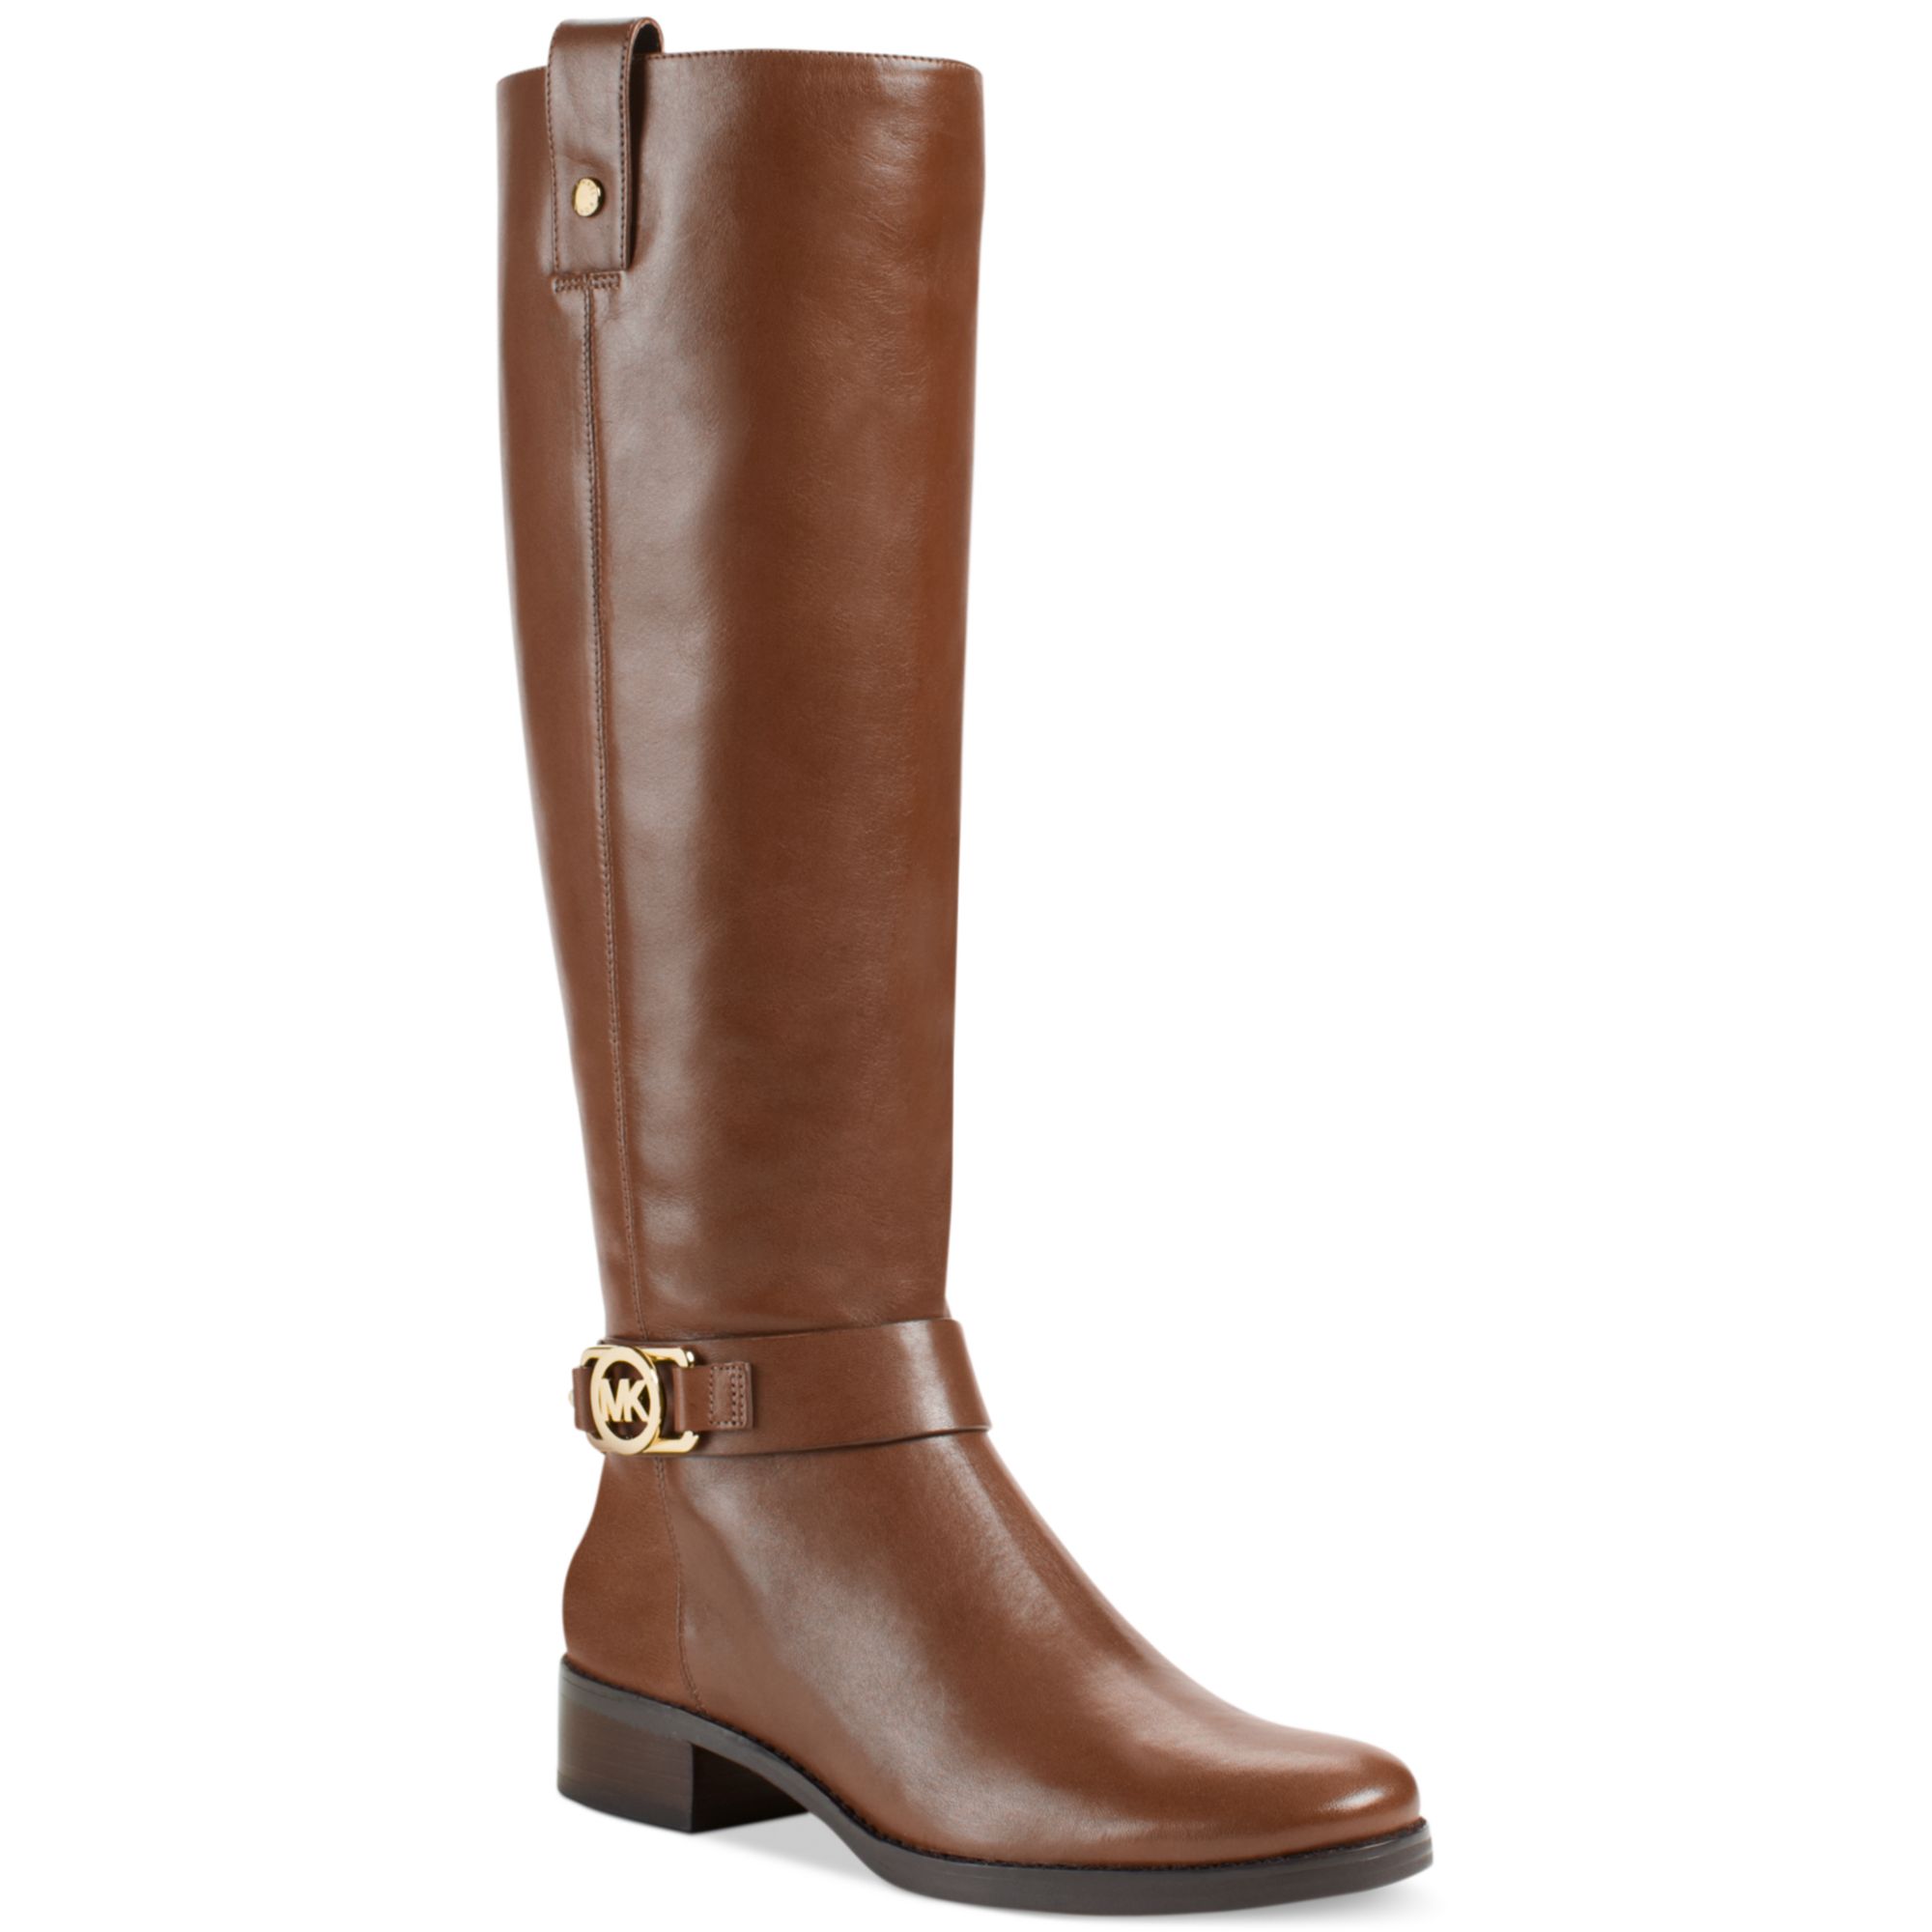 Lyst - Michael kors Charm Wide Calf Riding Boots in Brown